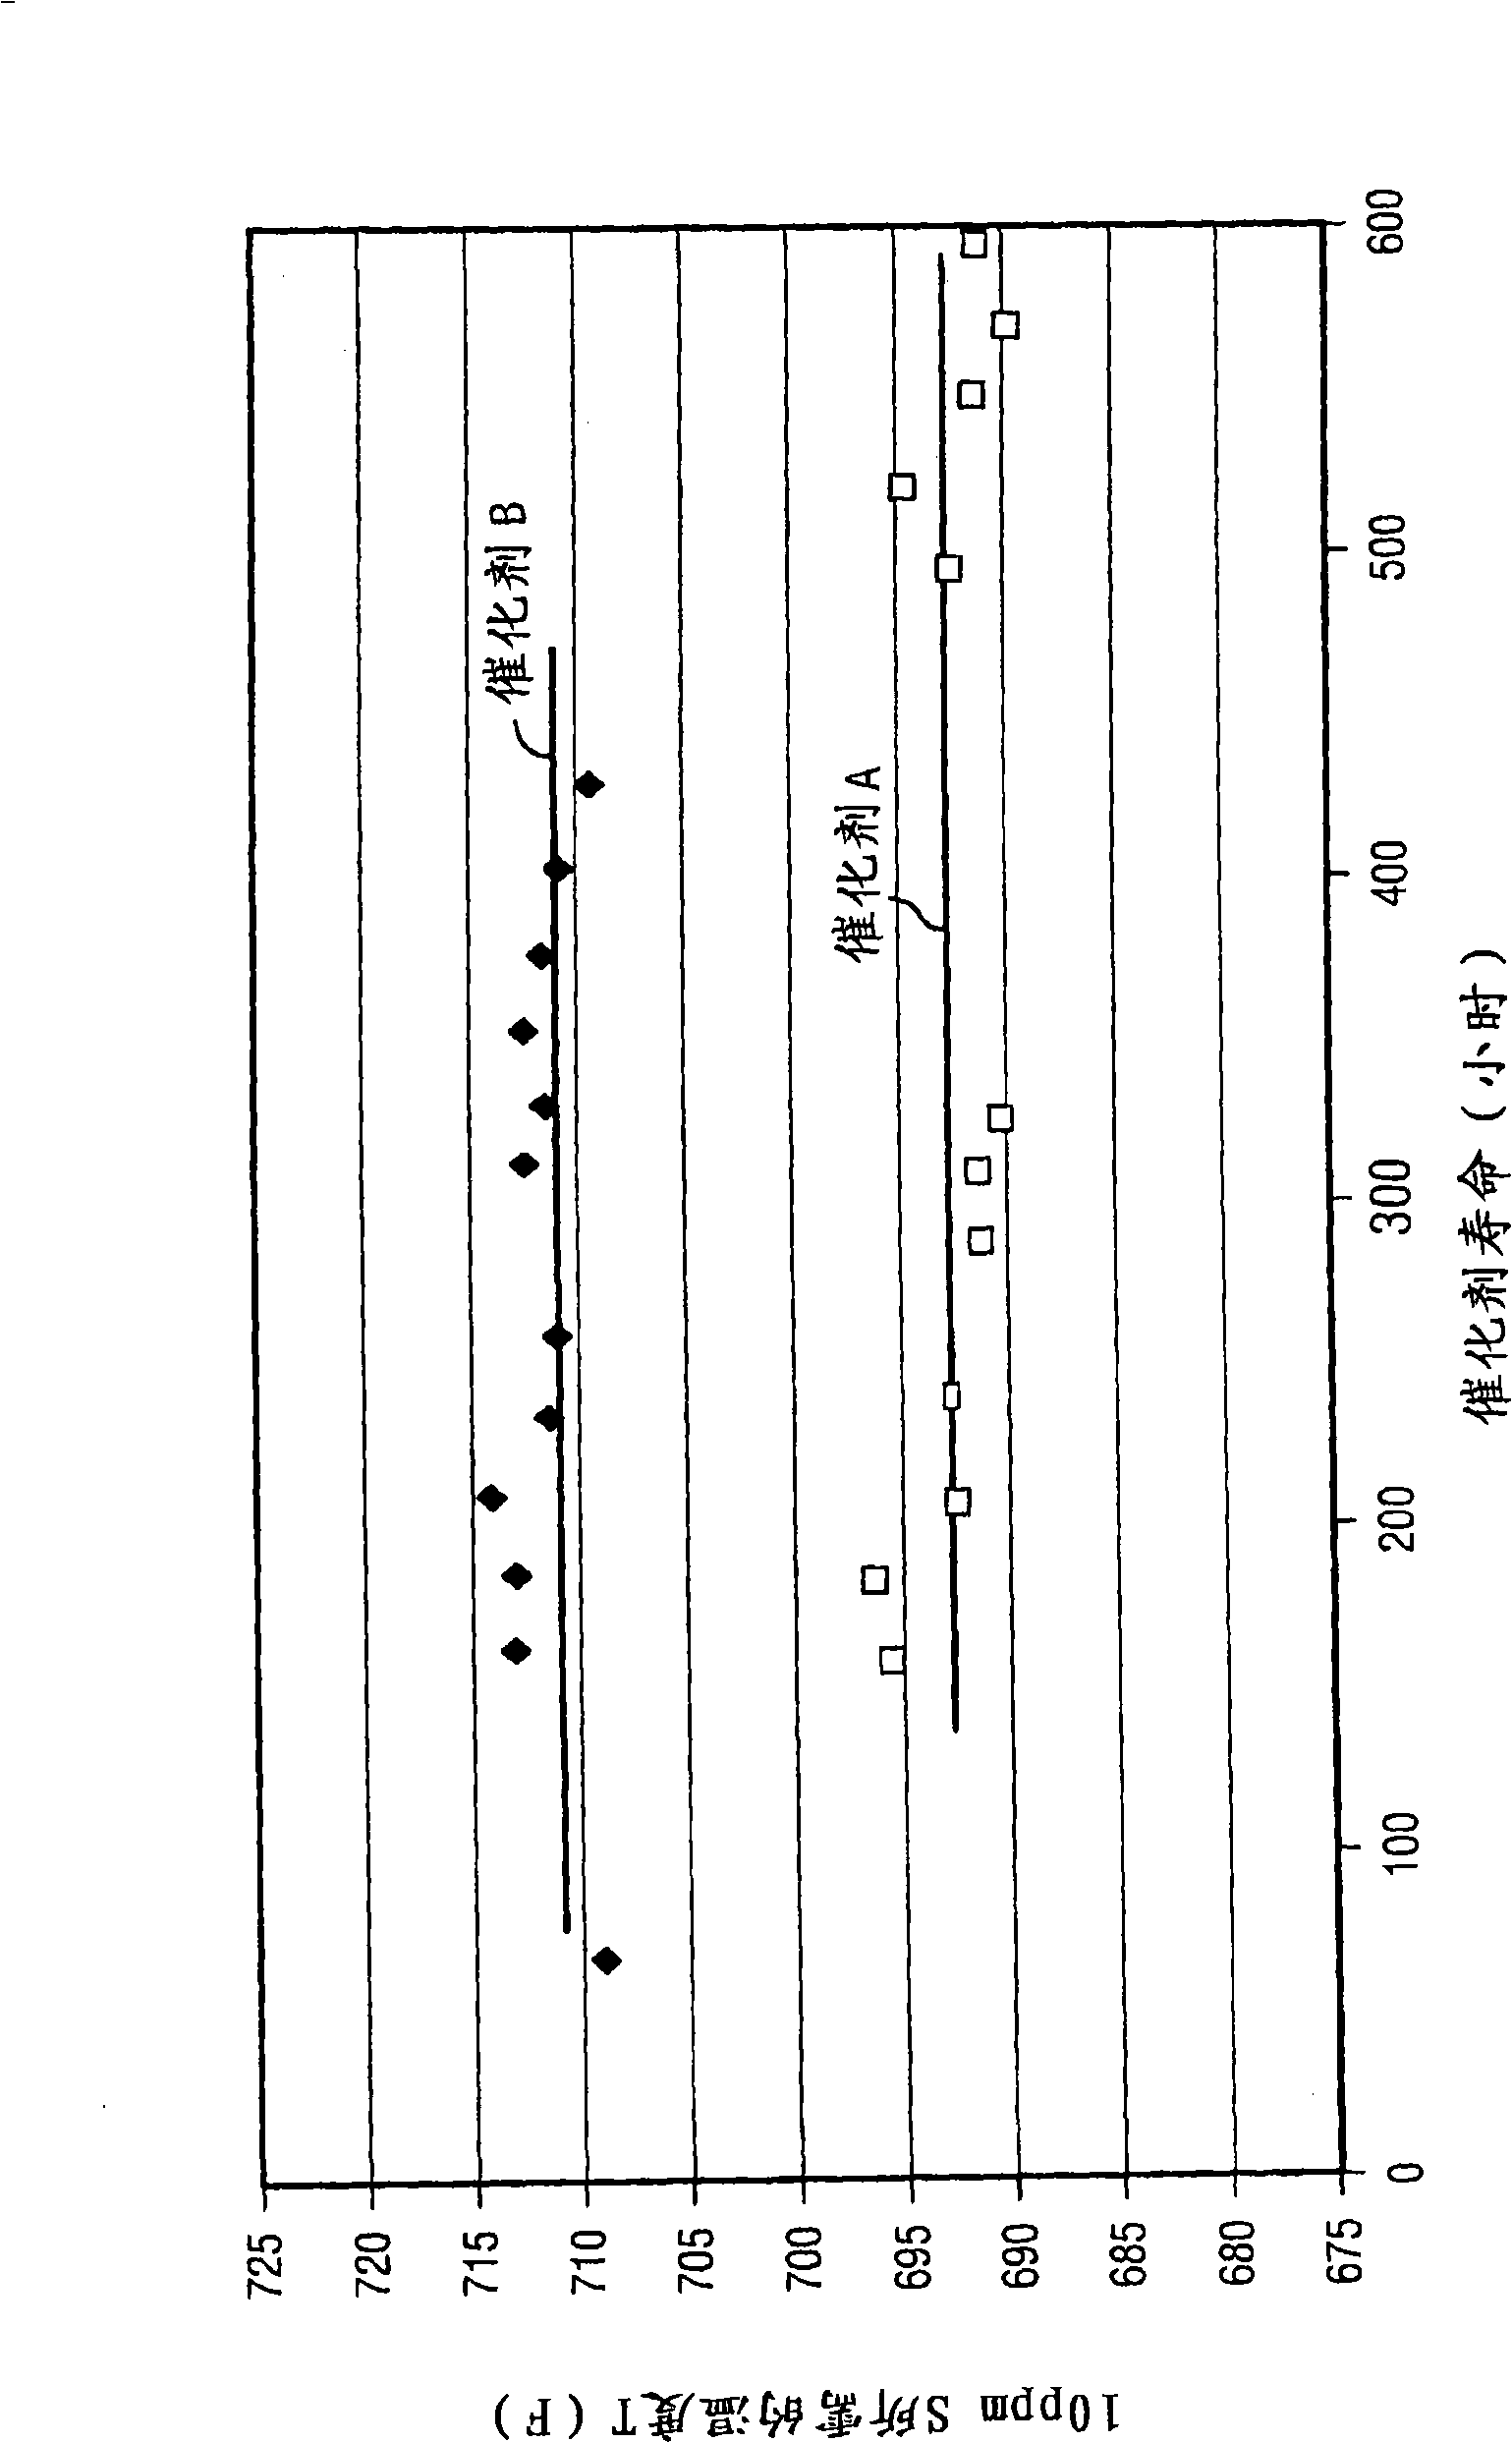 A catalyst and process for the manufacture of ultra-low sulfur distillate product